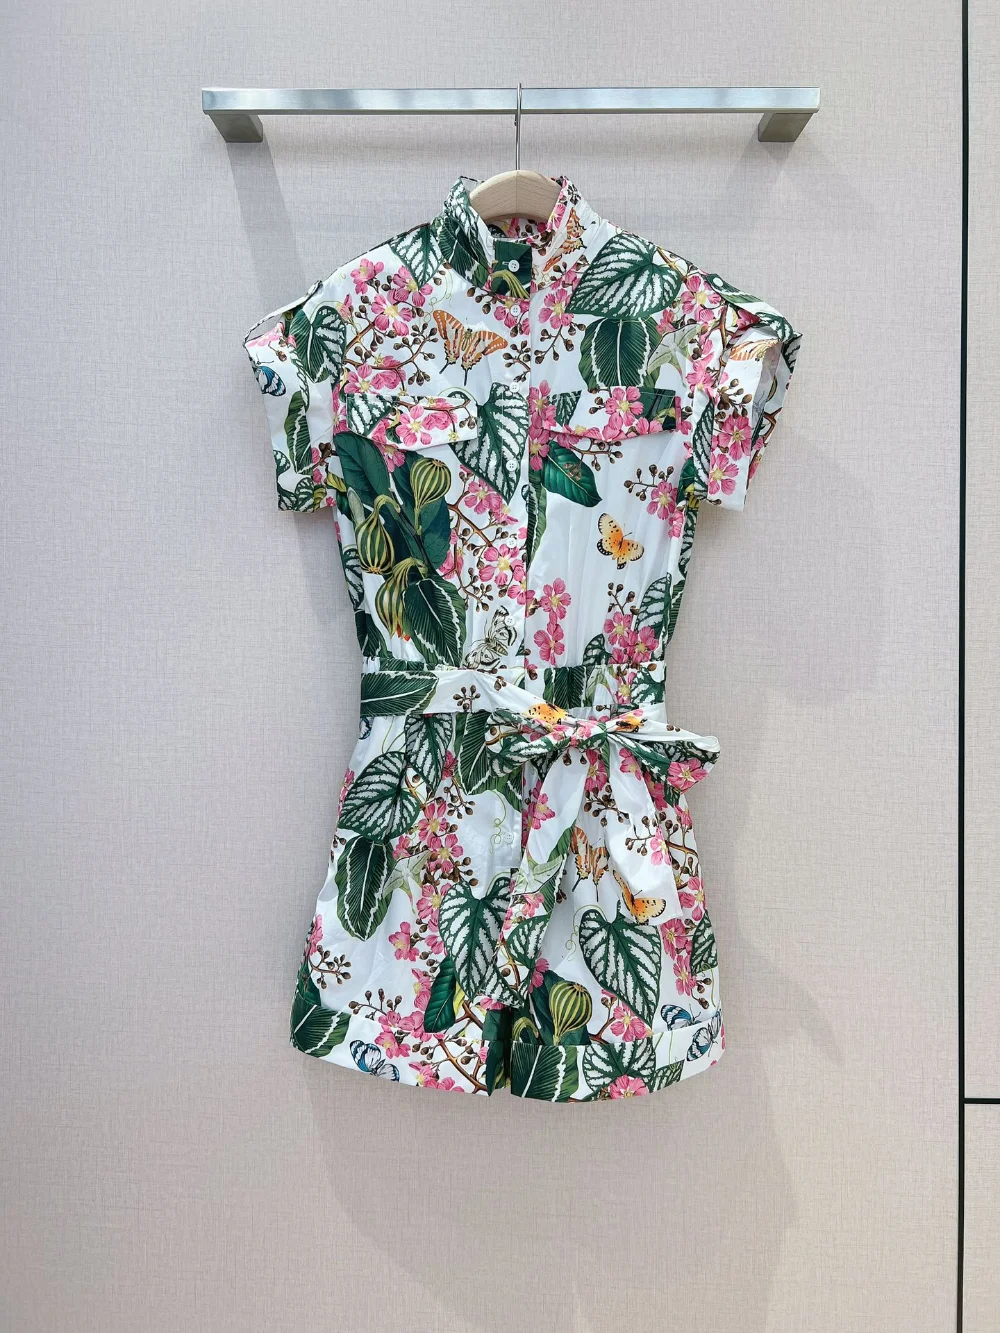 New  2023 Top Quality Spring SummerNatural Cotton Fabric Floral Print Short Sleeve Playsuit Fashion Women